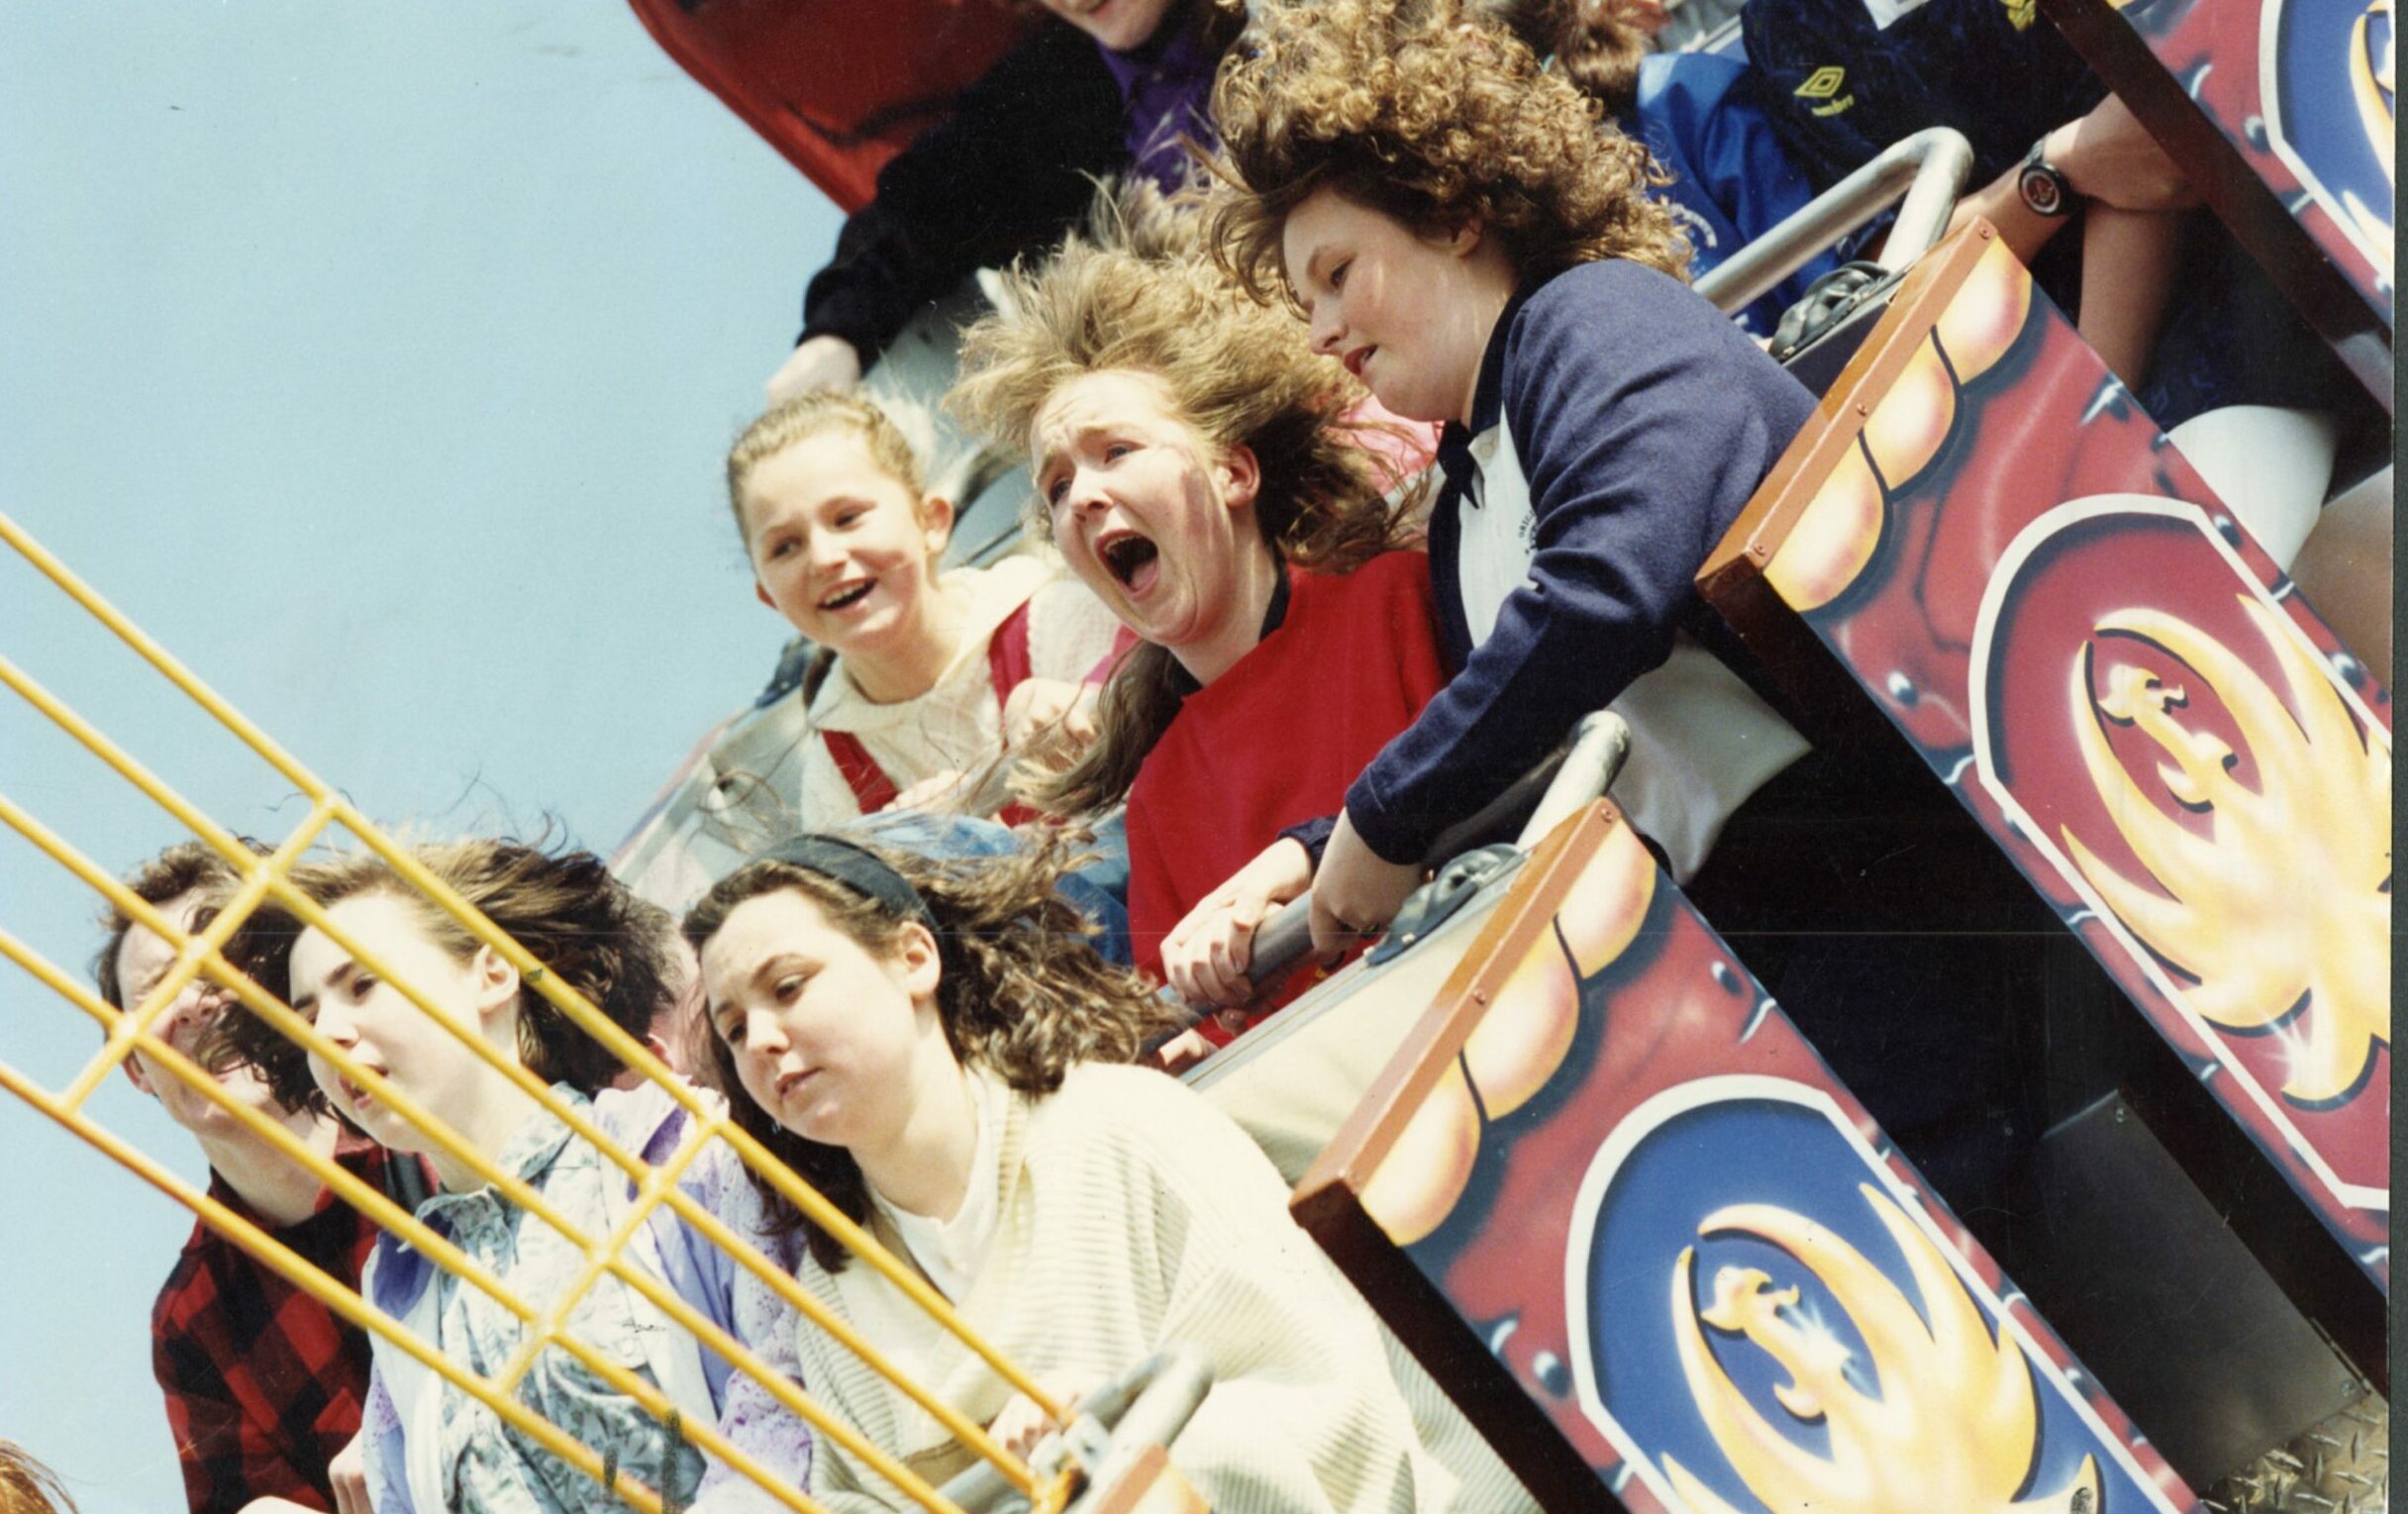 People screaming on a carnival ride at Caird park